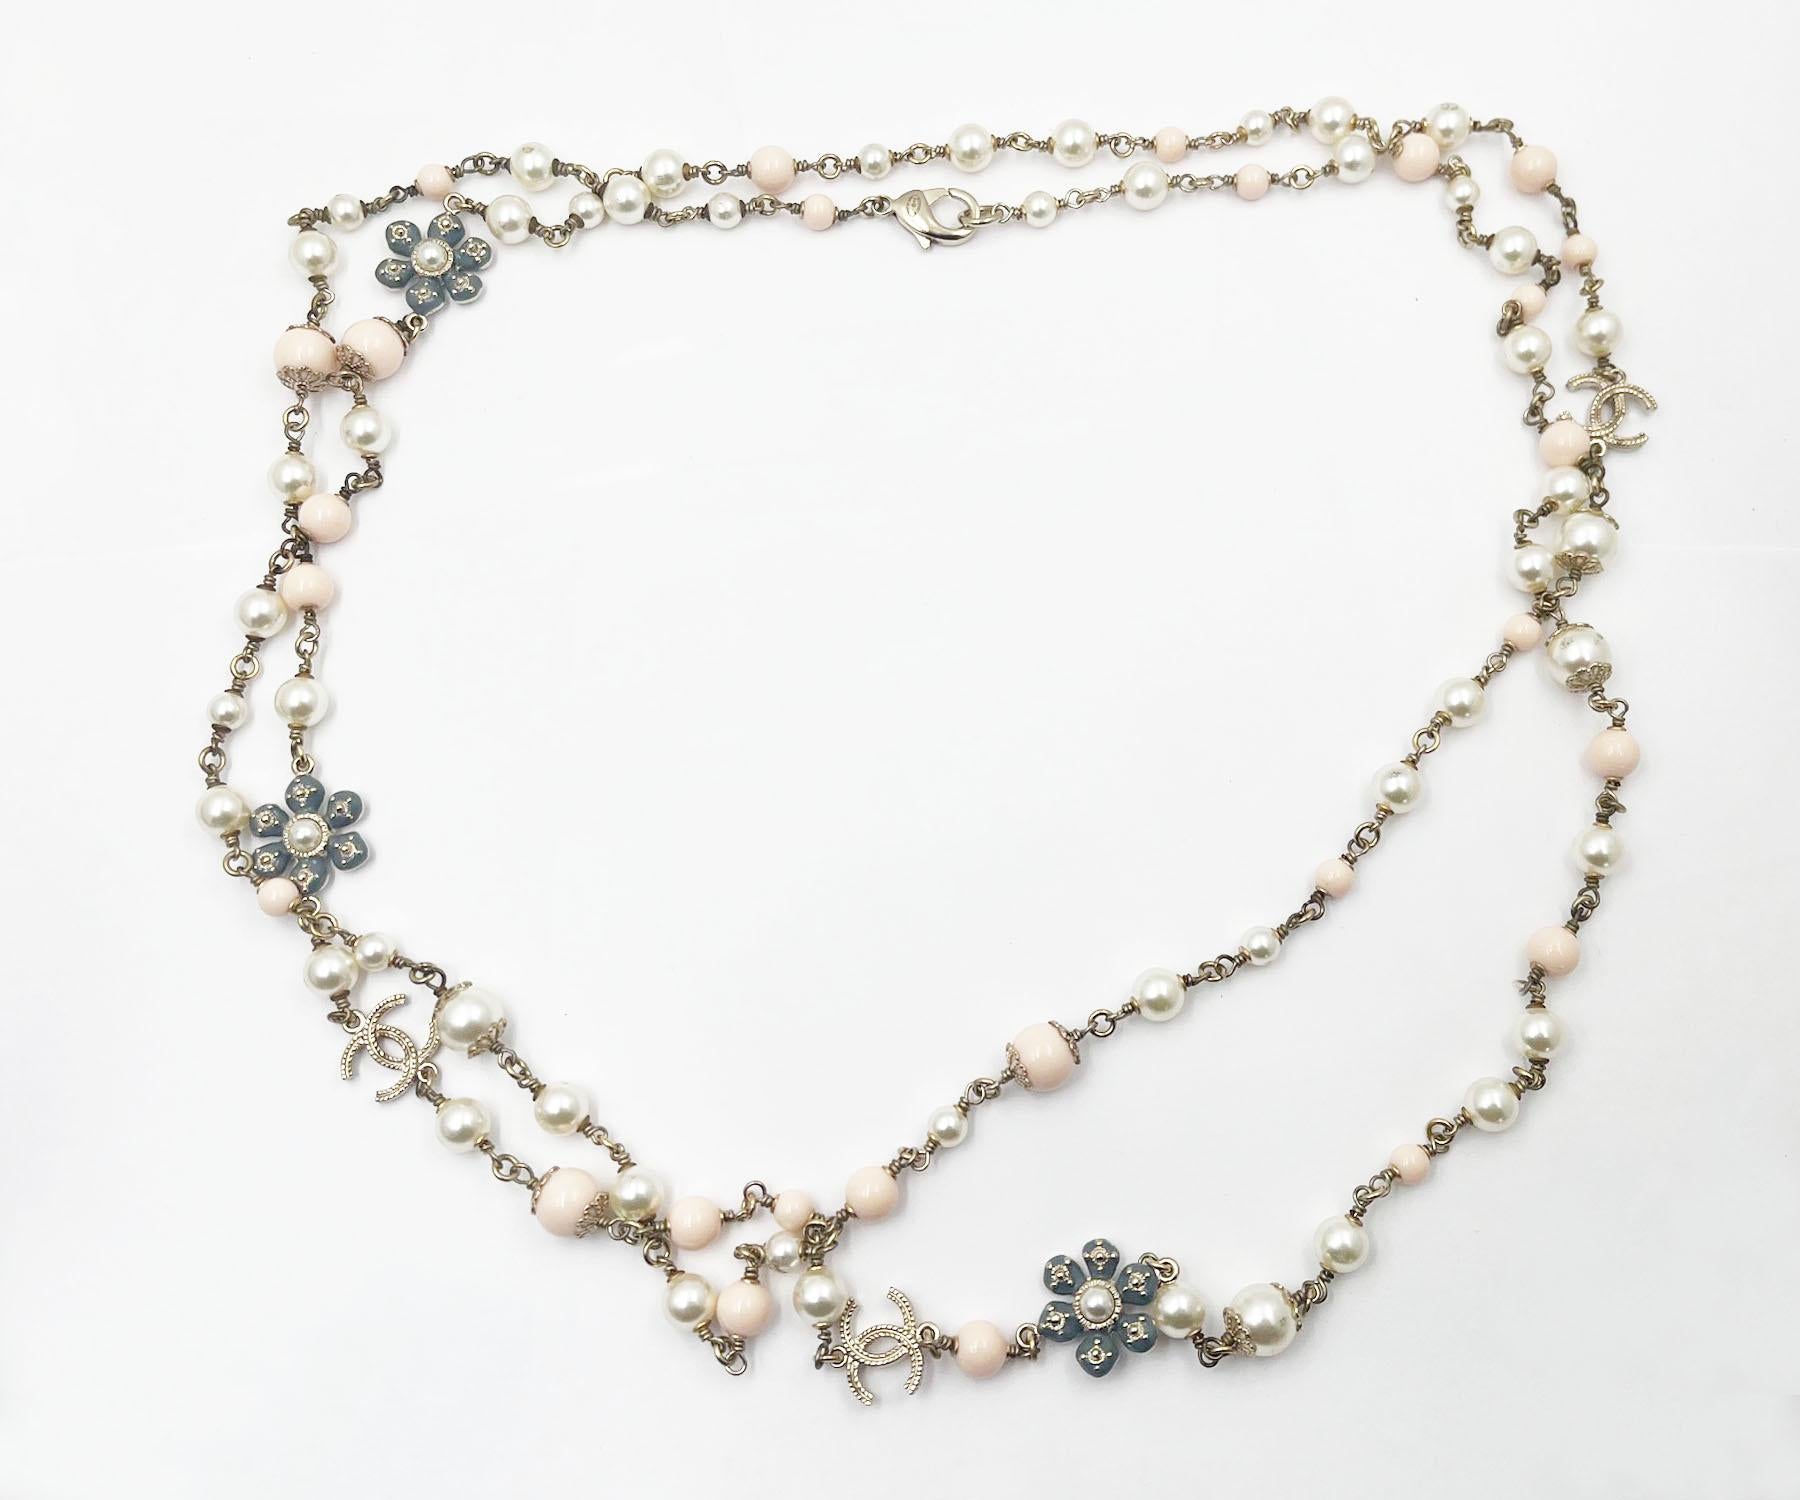 Chanel Rare Gold CC Pastel Blue Pink Flower Pearl Necklace

*Marked 18
*Made in Italy
*Comes with the original box and pouch

- It is approximately 62